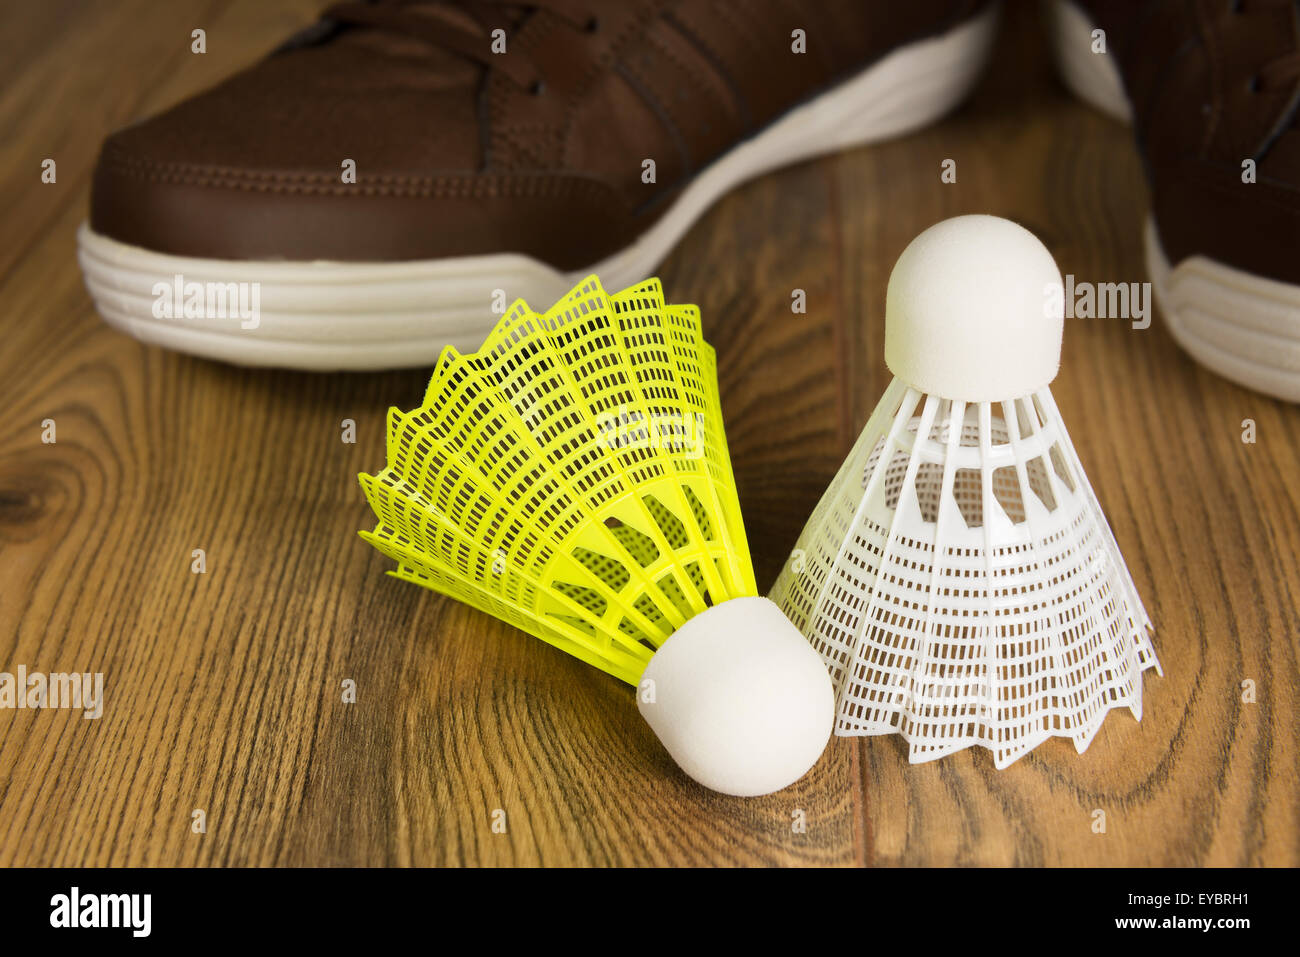 shuttlecocks for badminton white and yellow on the wooden floor Stock Photo